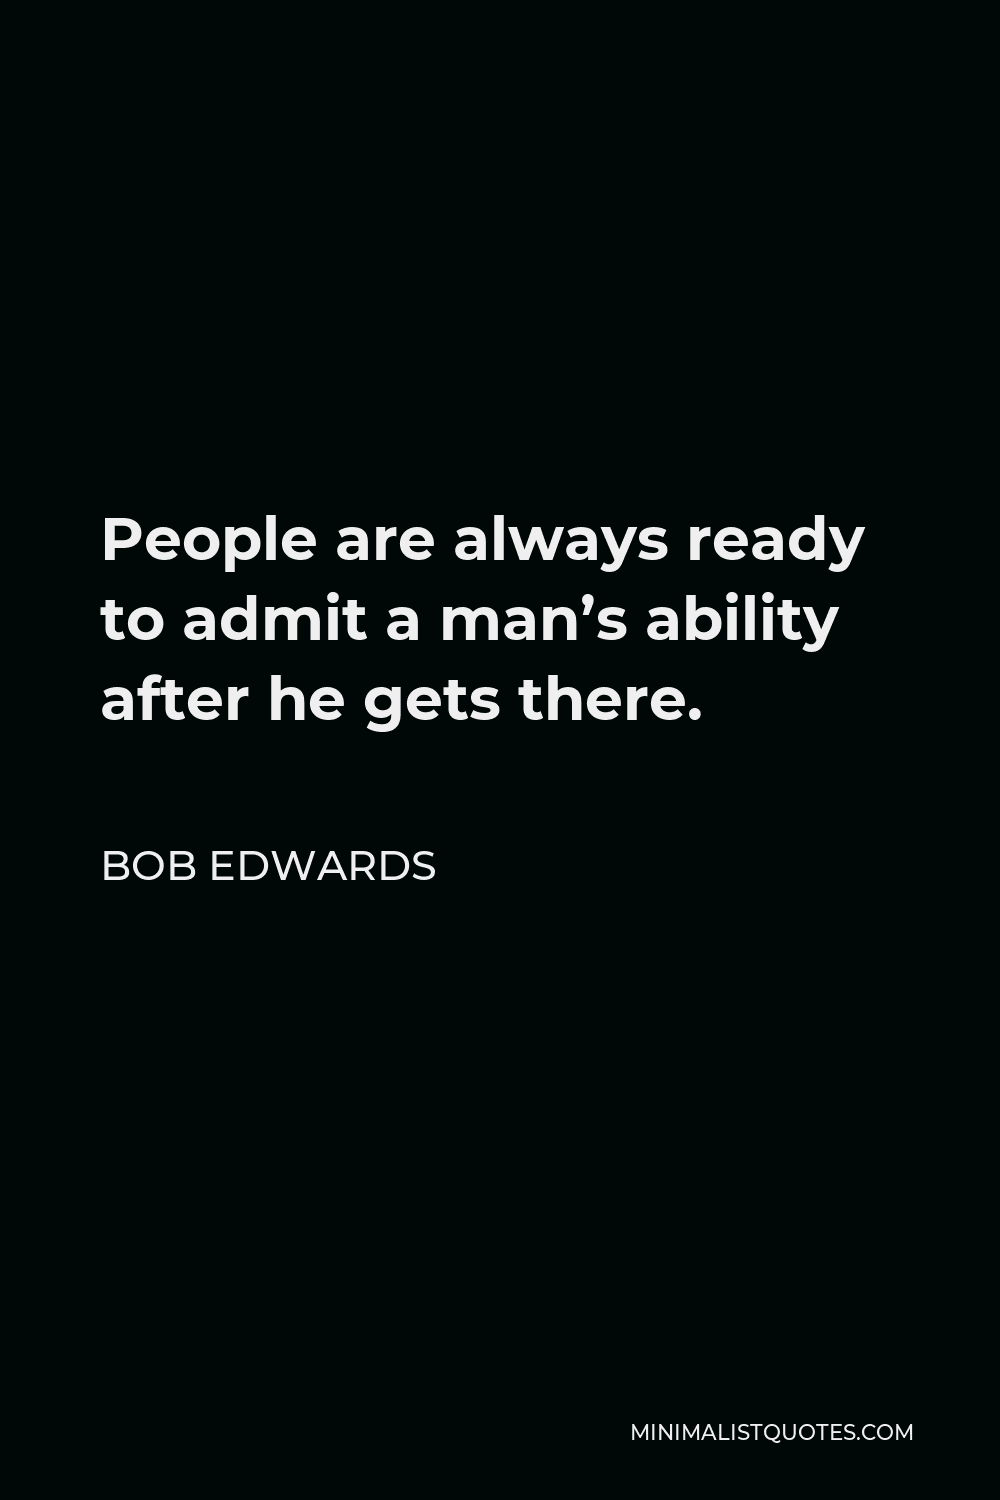 Bob Edwards Quote - People are always ready to admit a man’s ability after he gets there.